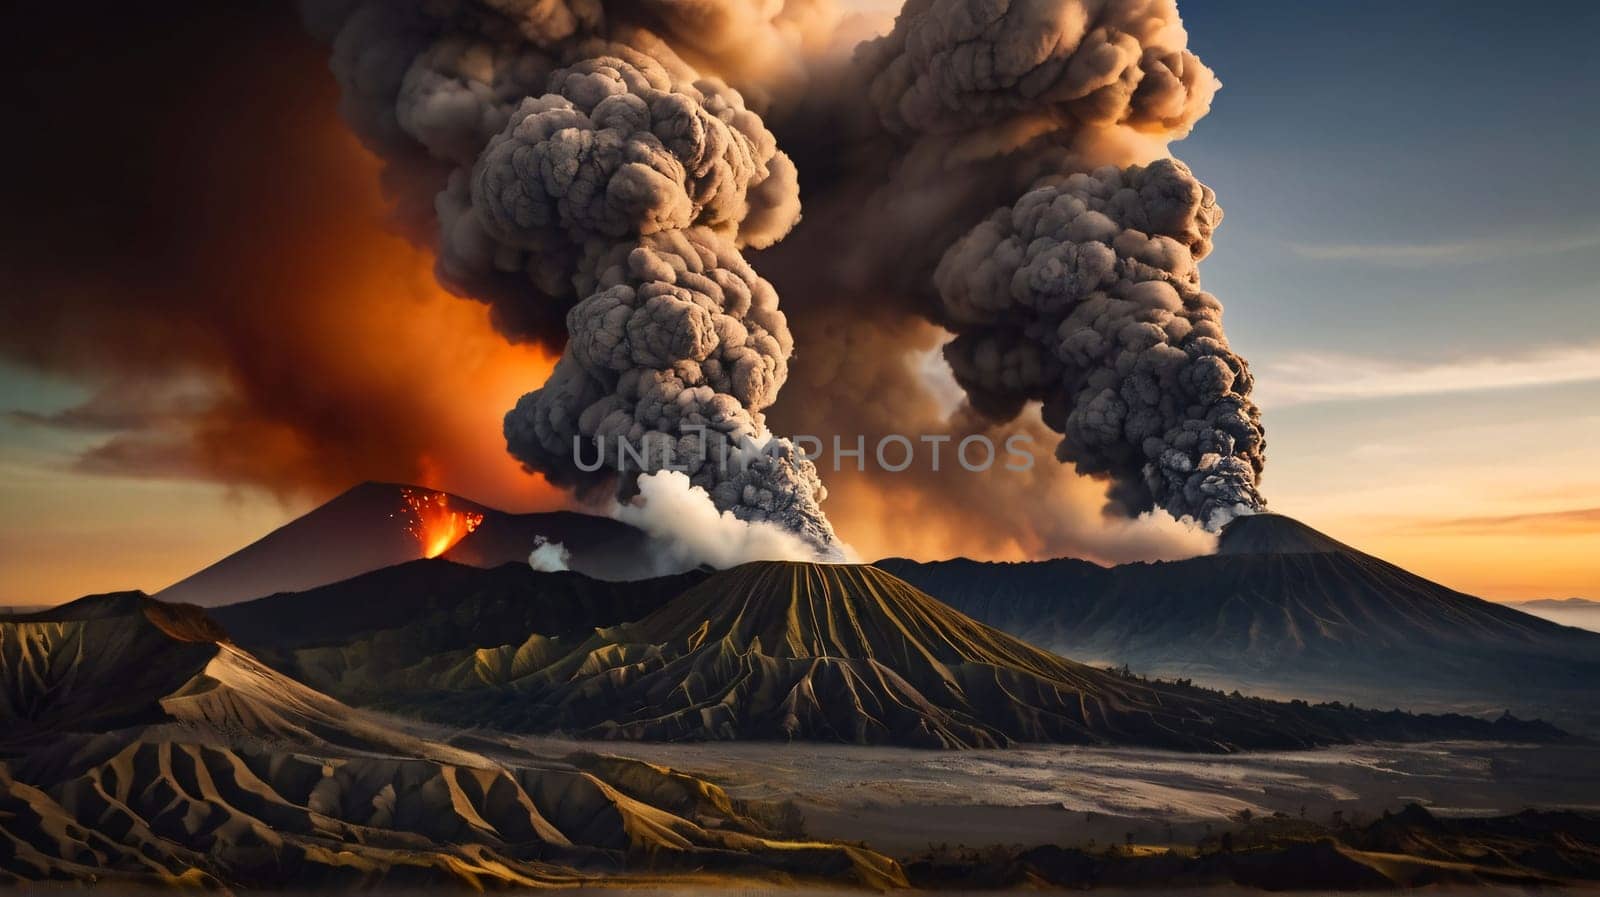 ancient volcano eruption with giant ash cloud and burst of molten lava, volcano eruption with massive high bursts of lava and hot clouds soaring high into the sky, pyroclastic flow by antoksena